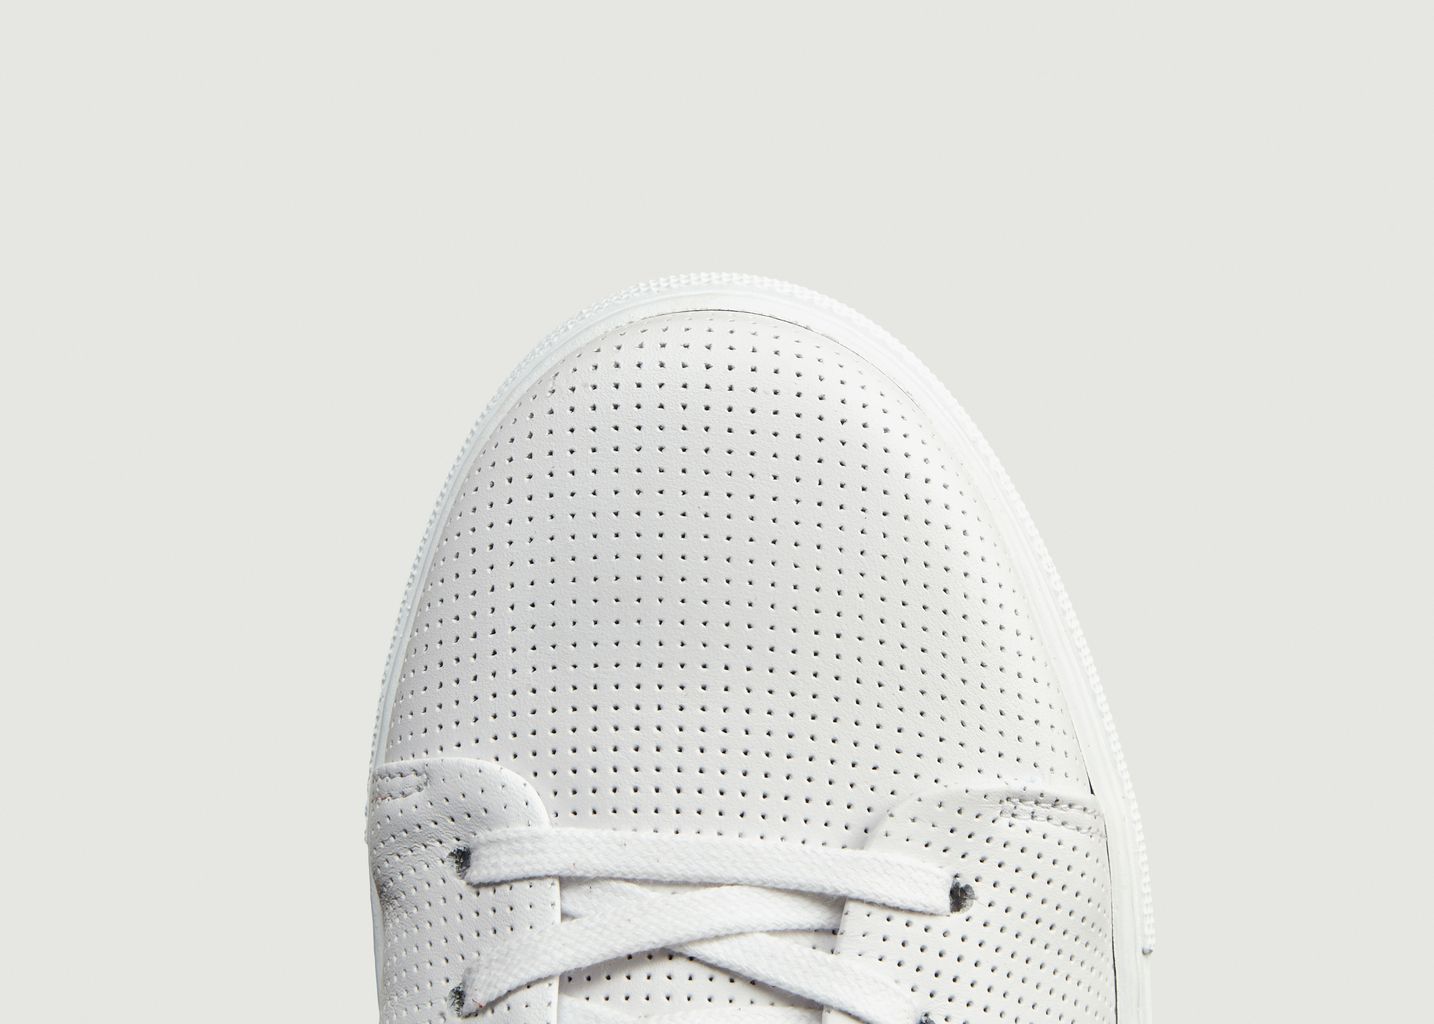 René perforated leather sneakers - M.Moustache